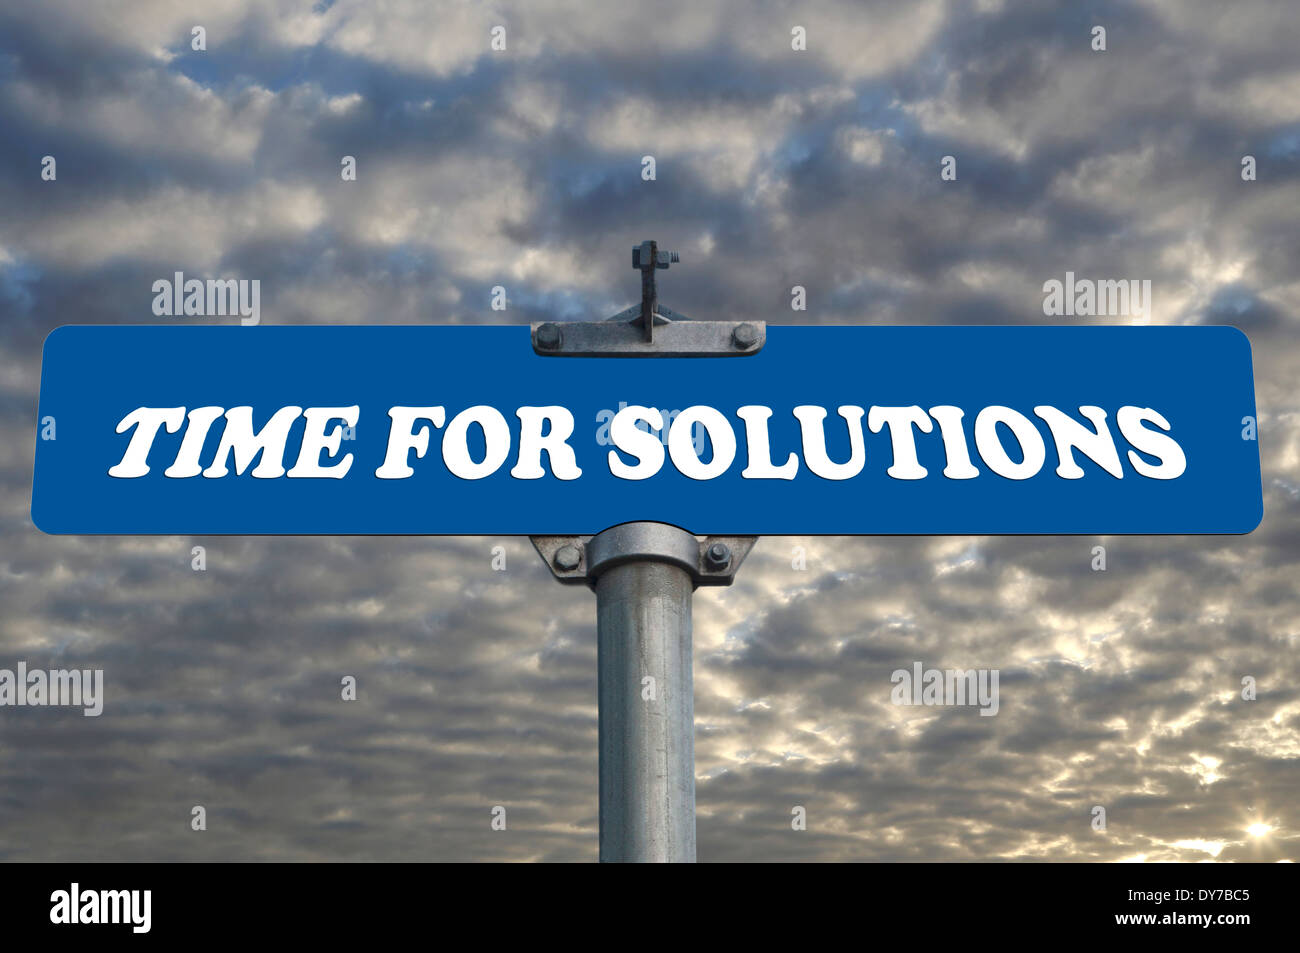 Time for solutions road sign Banque D'Images